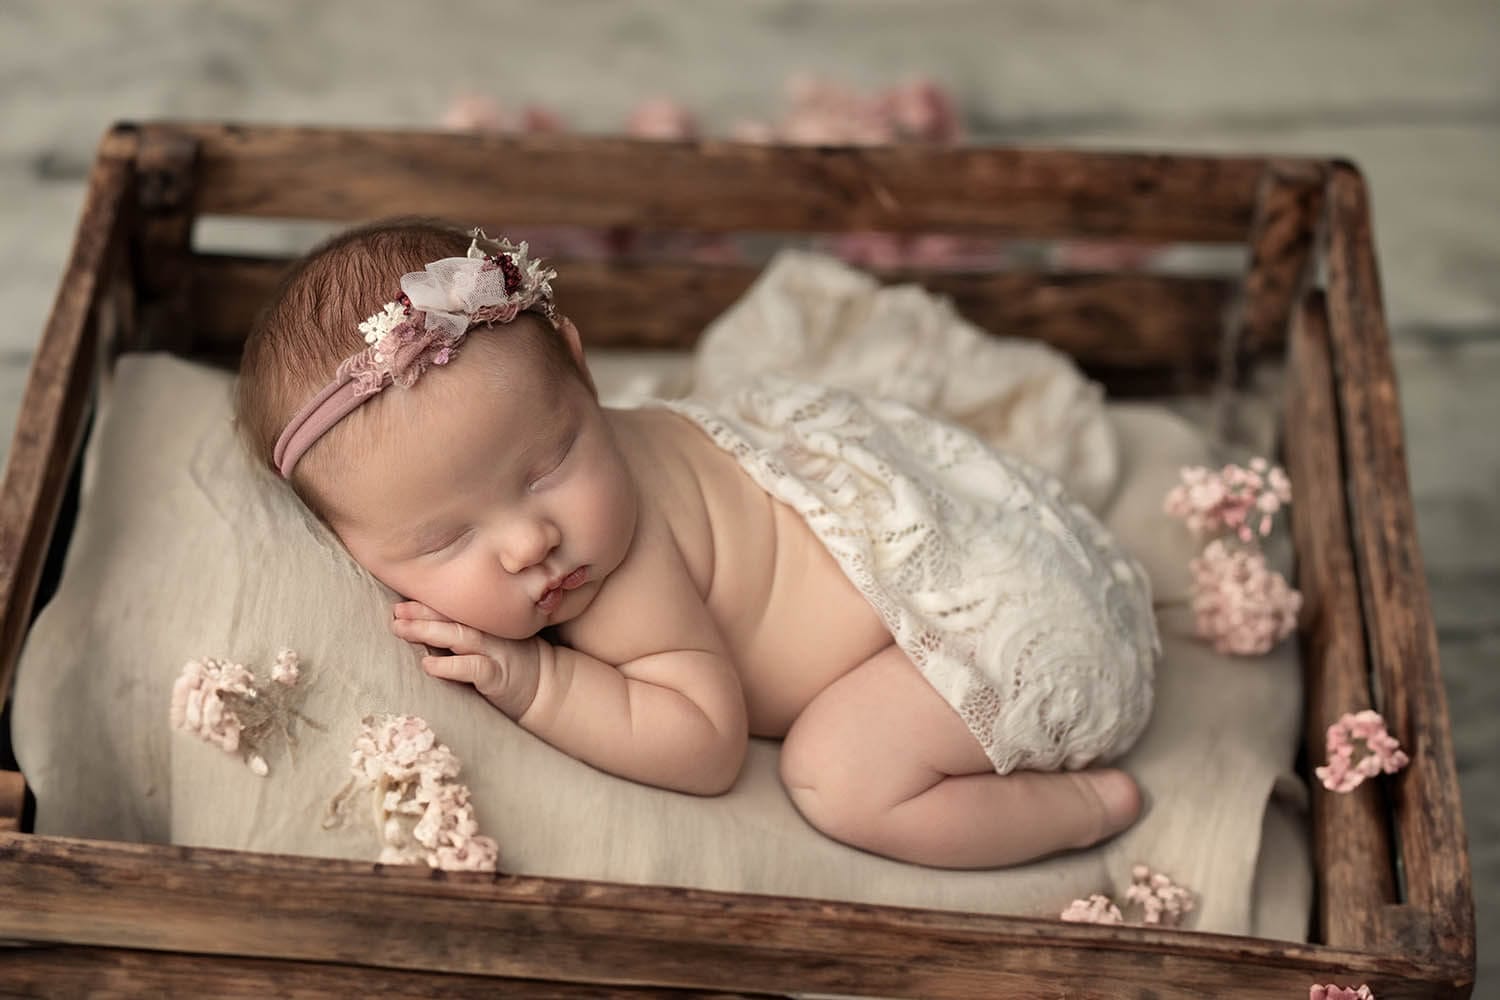 A newborn baby sleeps in a wooden crate in a lace blanket and pink headband with flowers around her thanks to lactation consultant new orleans